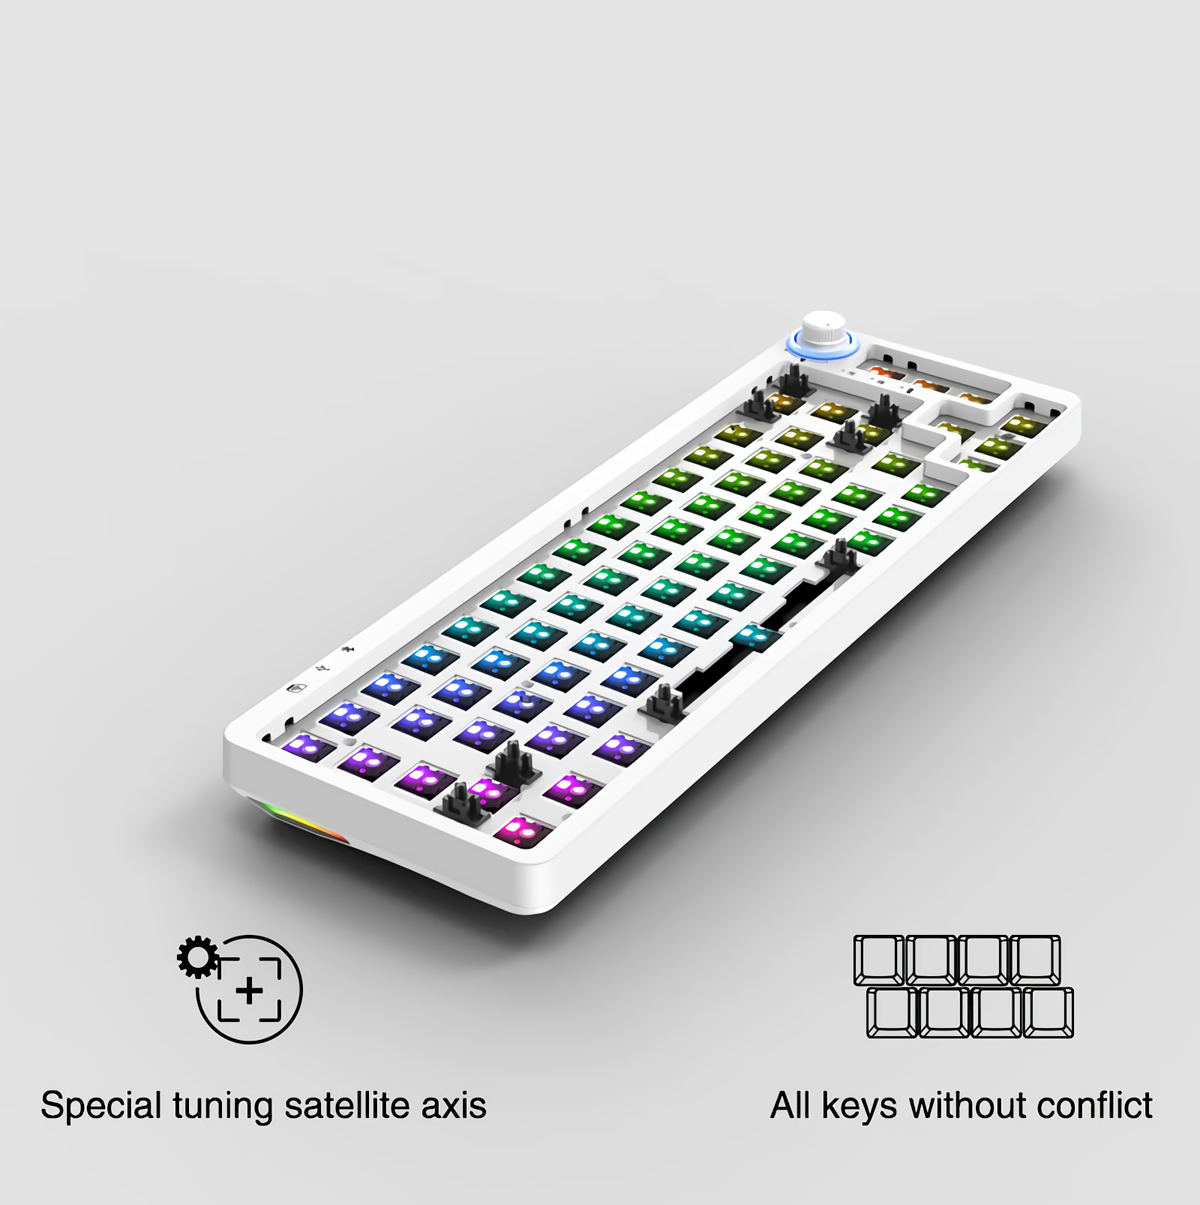 GAMAKAY LK67 Keyboard Customized Kit 67 Keys RGB Hot Swappable 3pin/5pin Switch 65% Programmable Triple Mode Wired bluetooth 5.0 2.4GHz Keyboard Kit NKRO PCB Mounting Plate Case with Rotate Button Custom Keyboard